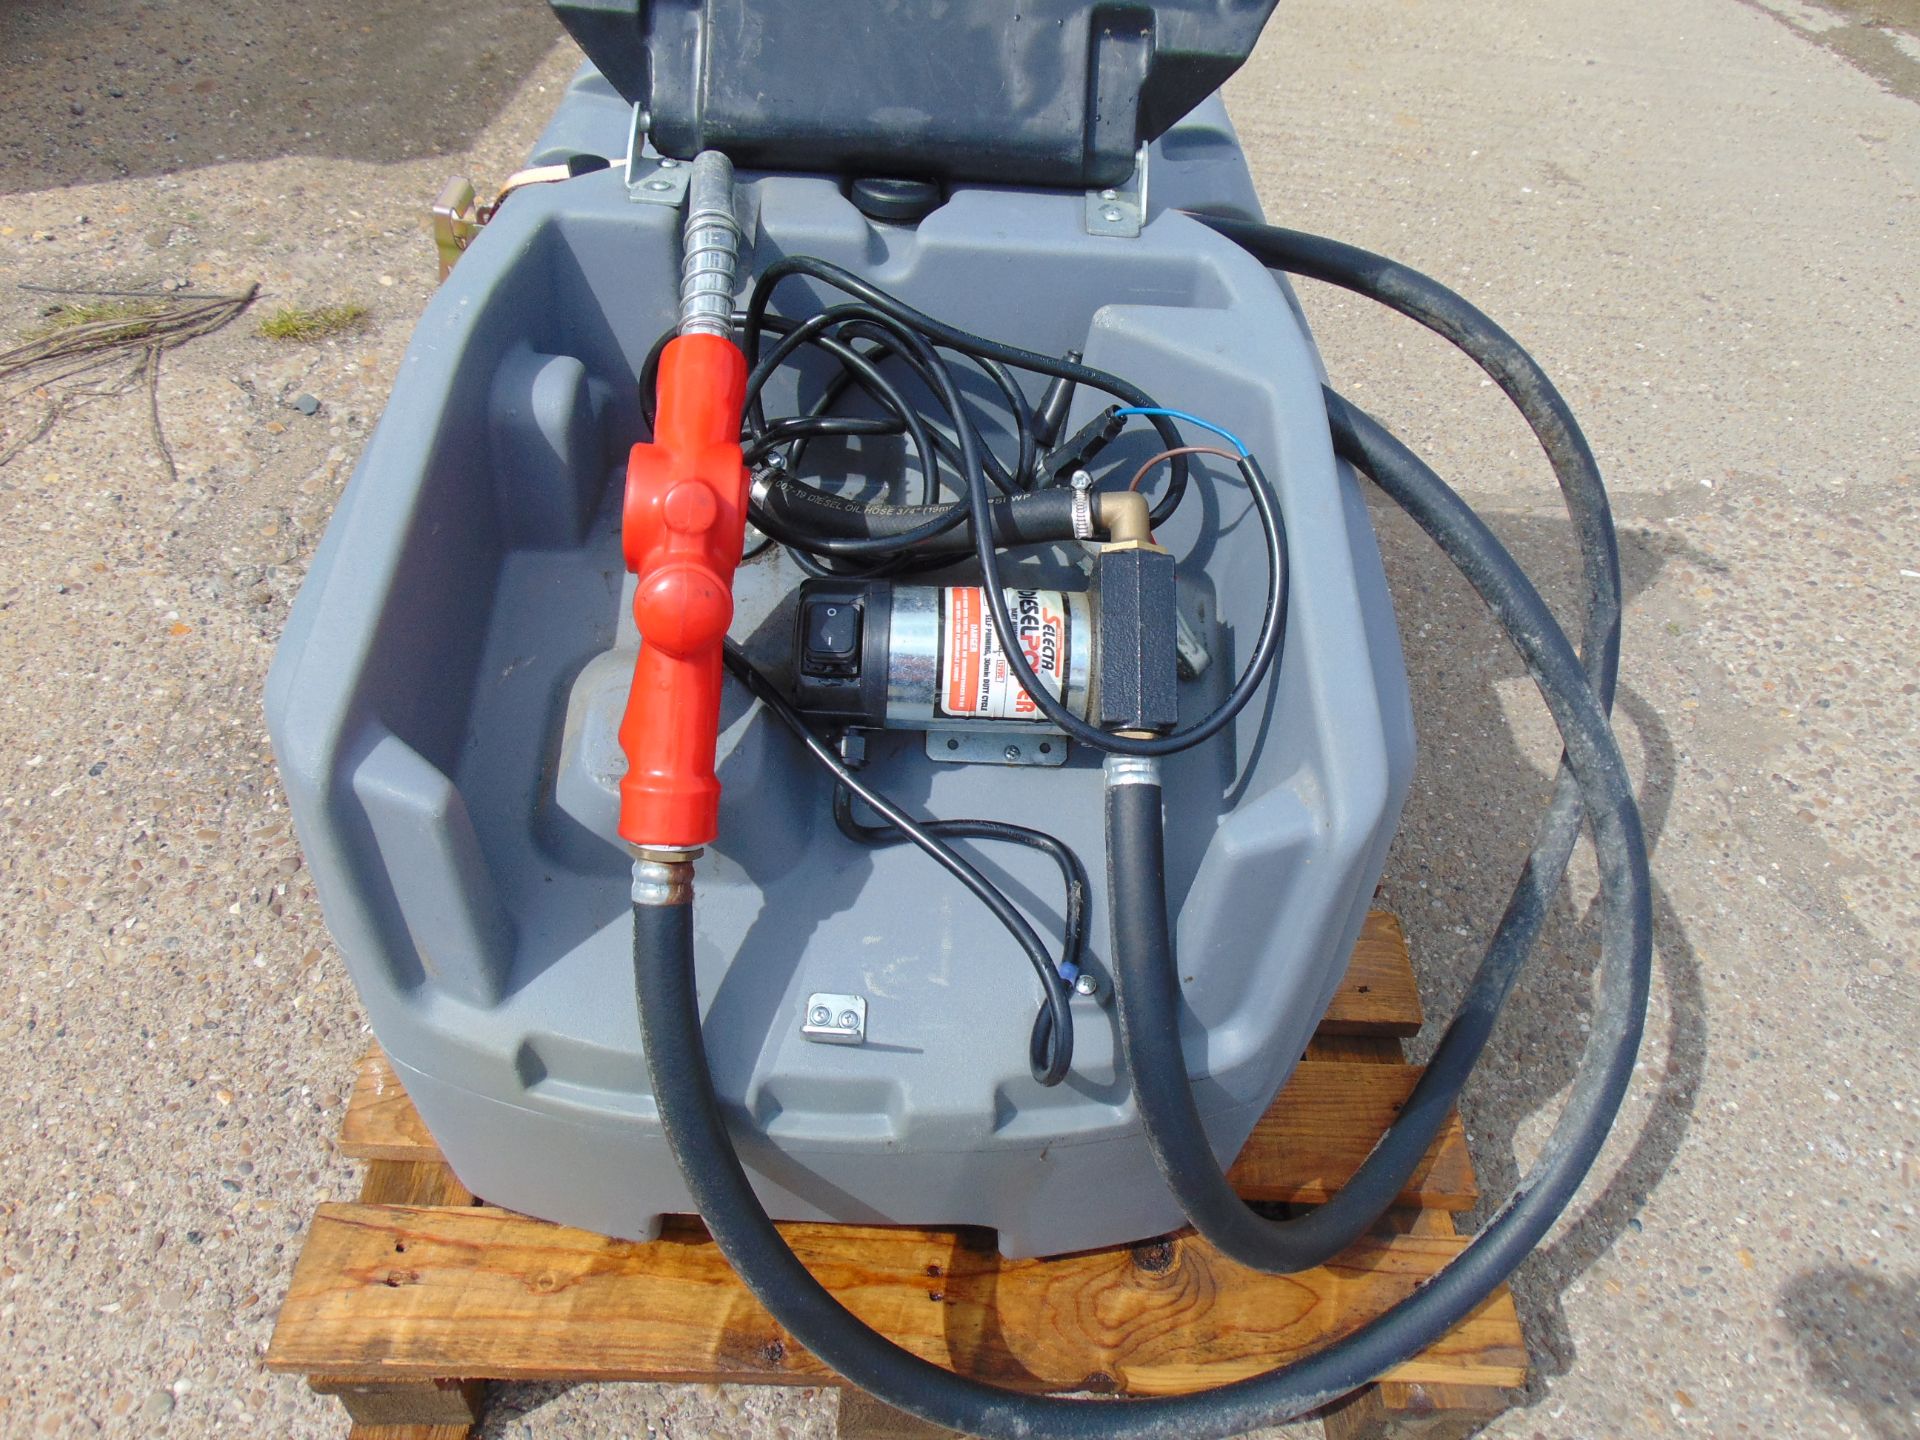 Selecta 200 Litre 50 Gall Portable Refuel Tank c/w 12Volt Pump Hose and Automatic Refuelling Nozzle - Image 2 of 14